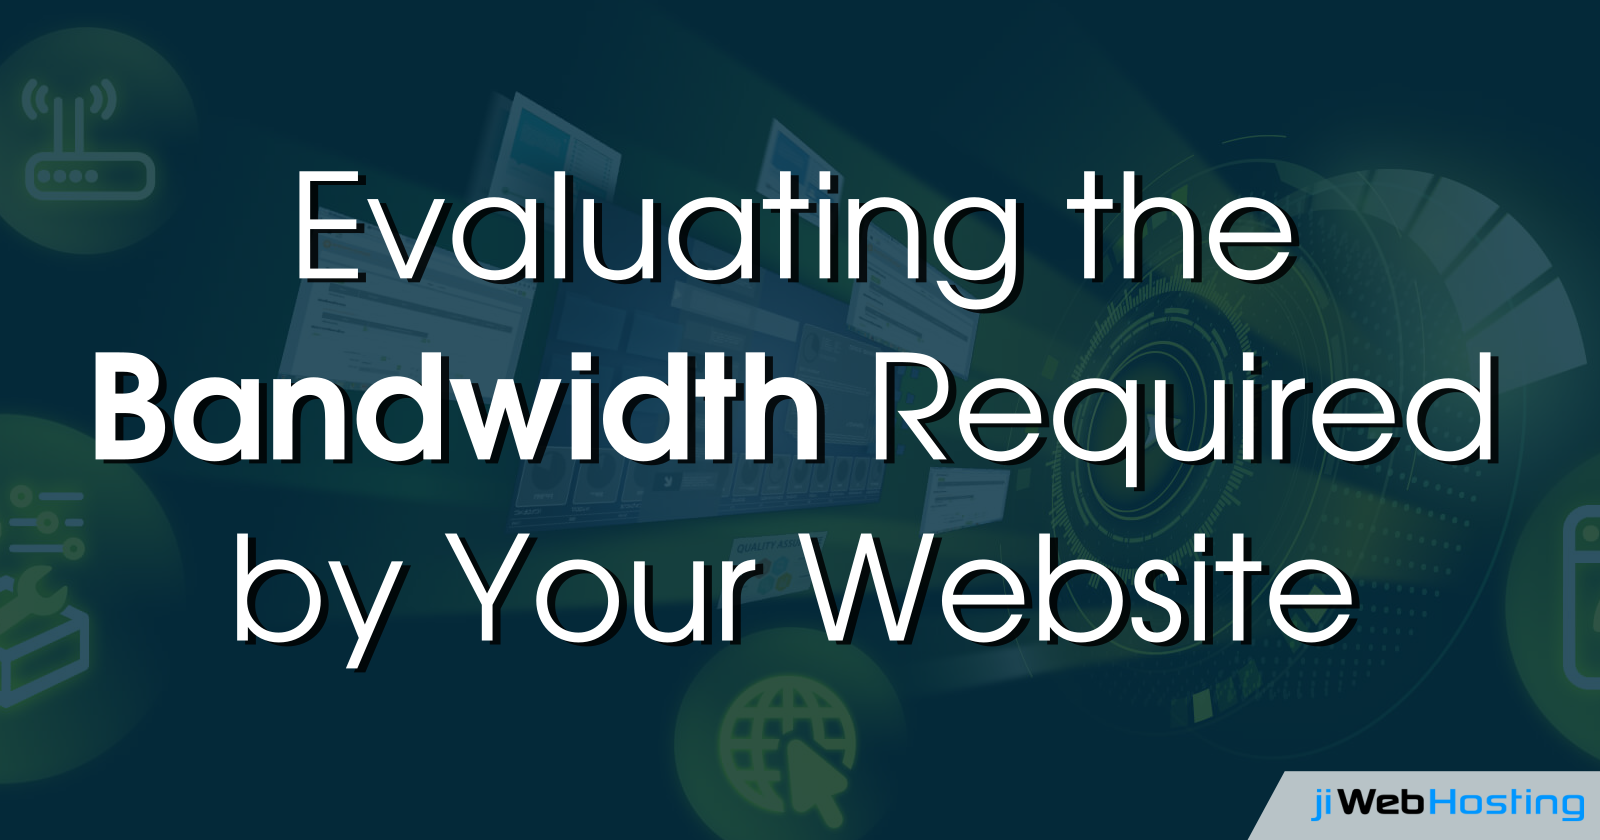 Evaluating the Bandwidth Required by Your Website